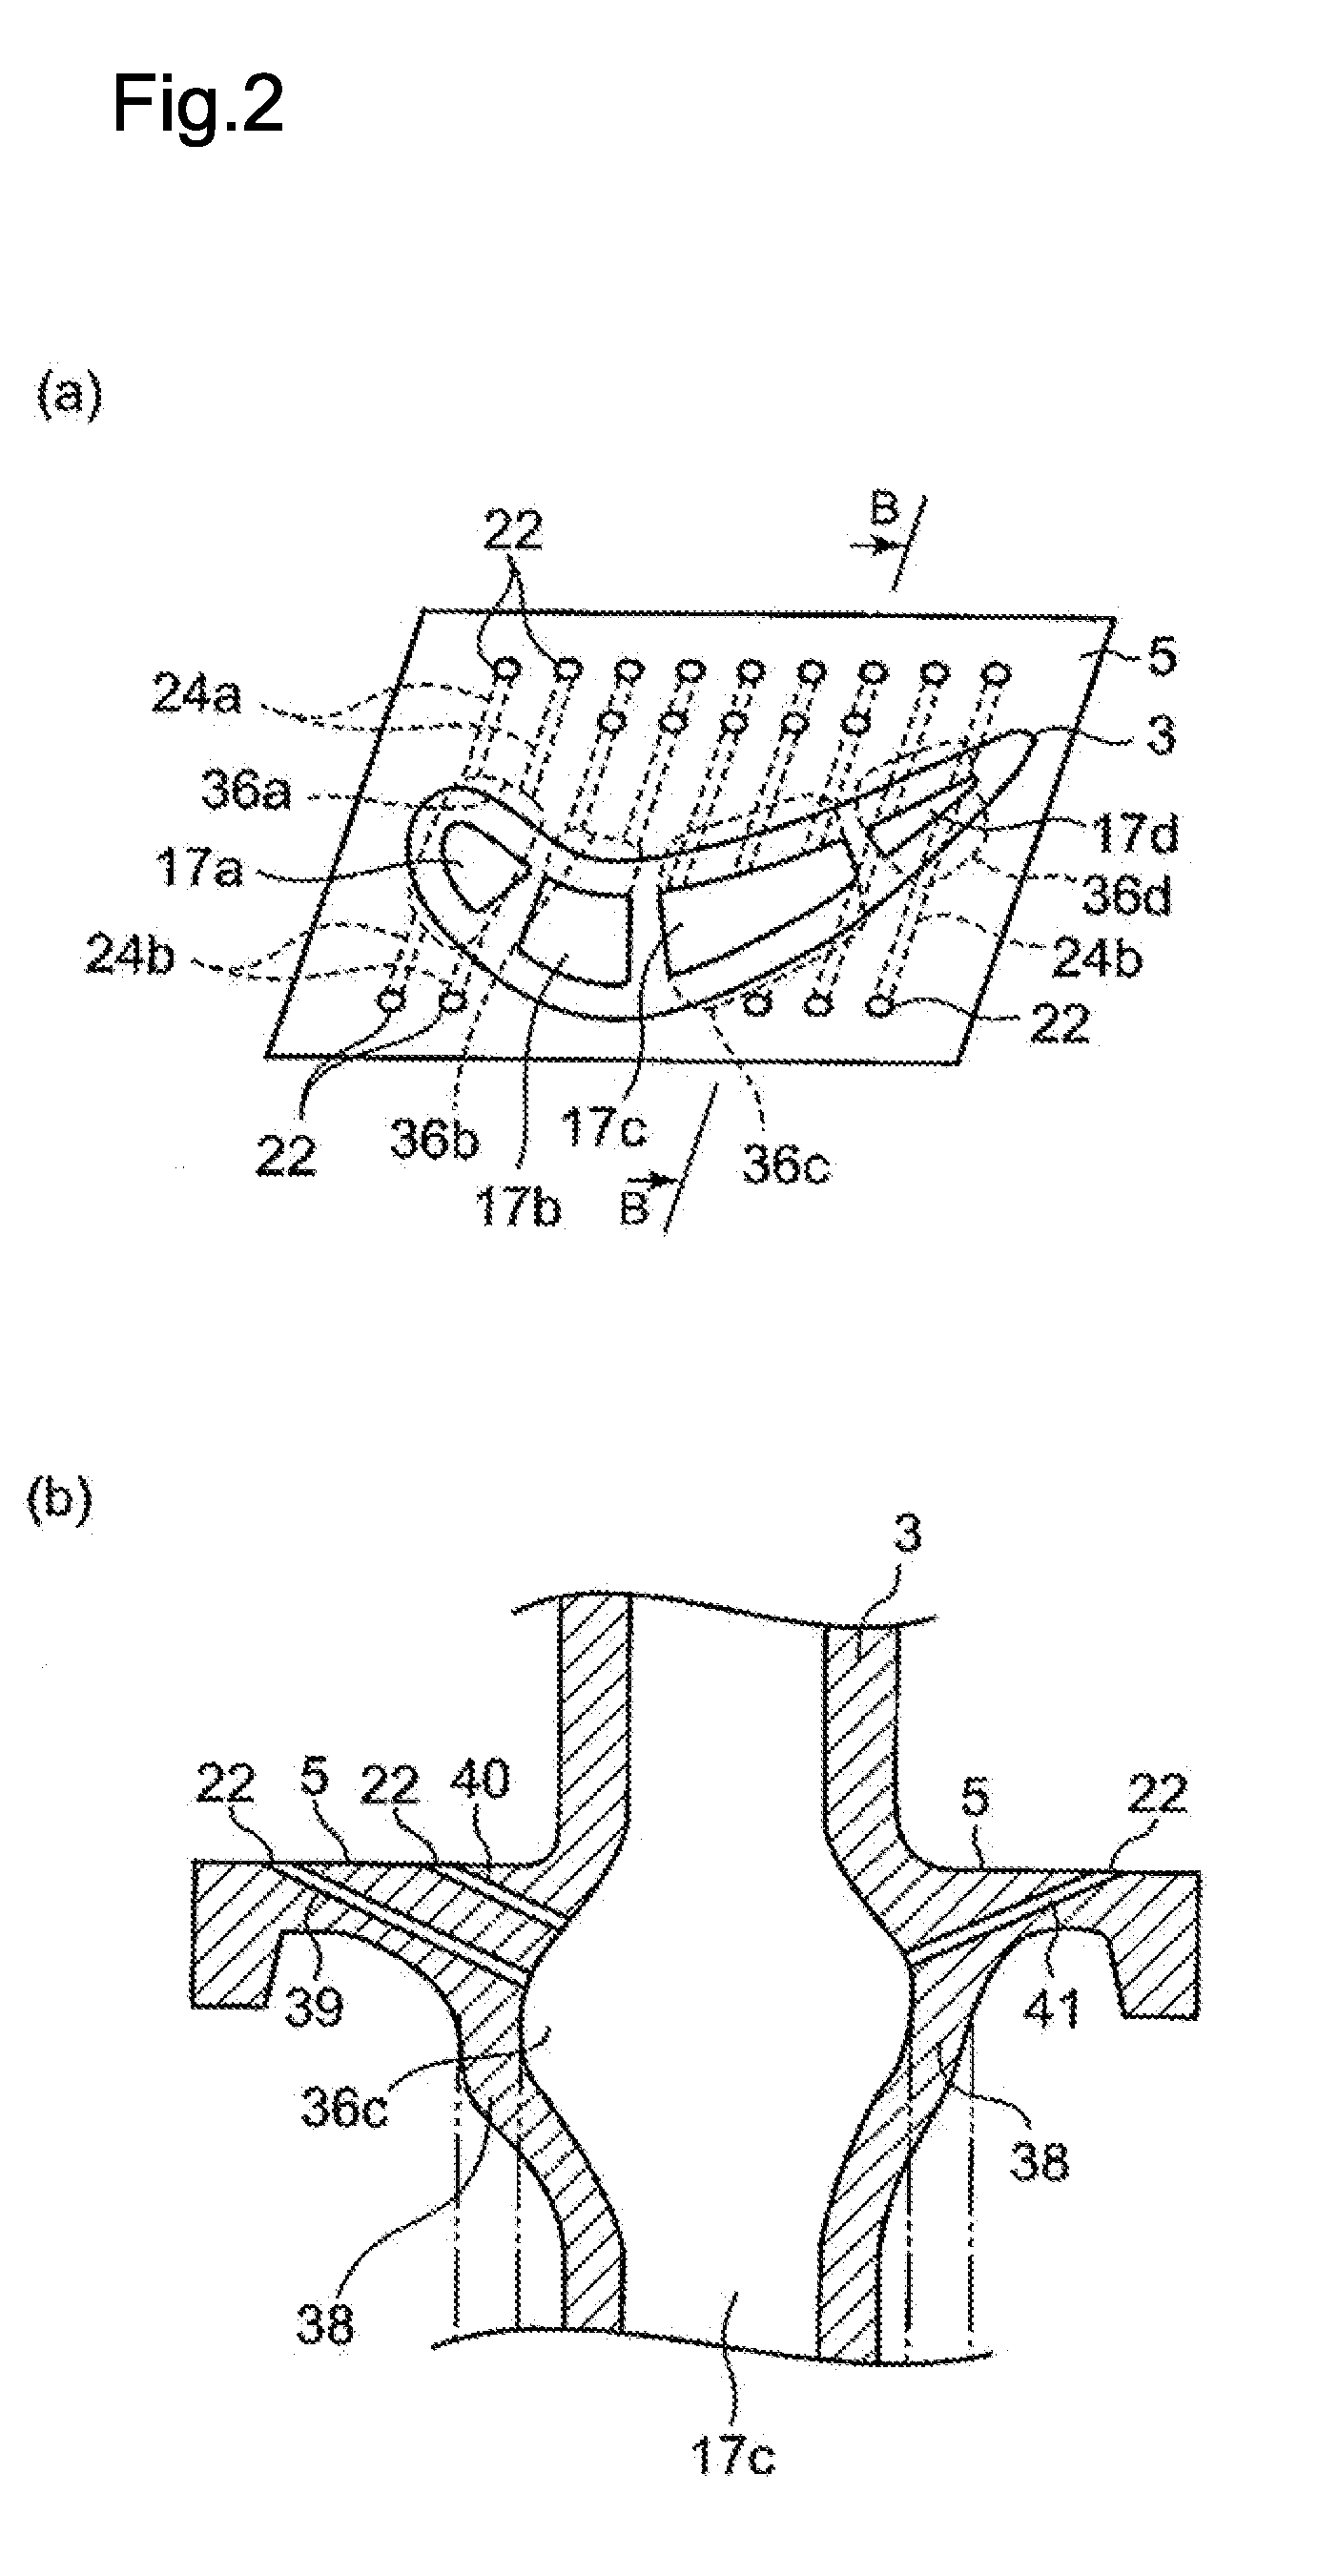 Platform cooling structure for gas turbine moving blade